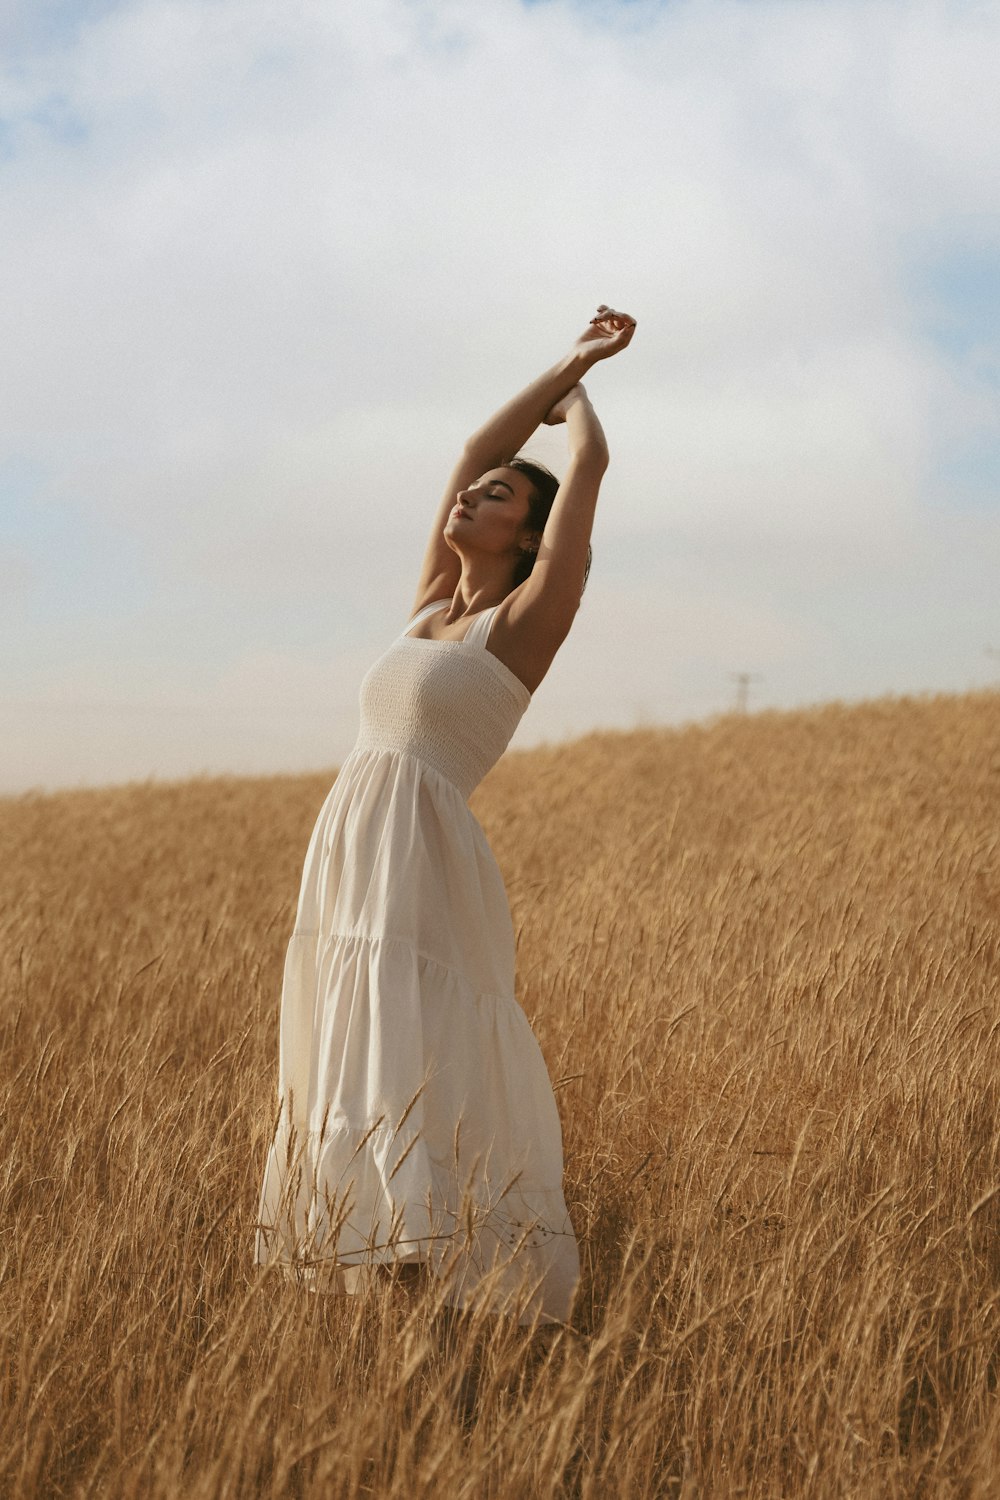 a person in a white dress standing in a field